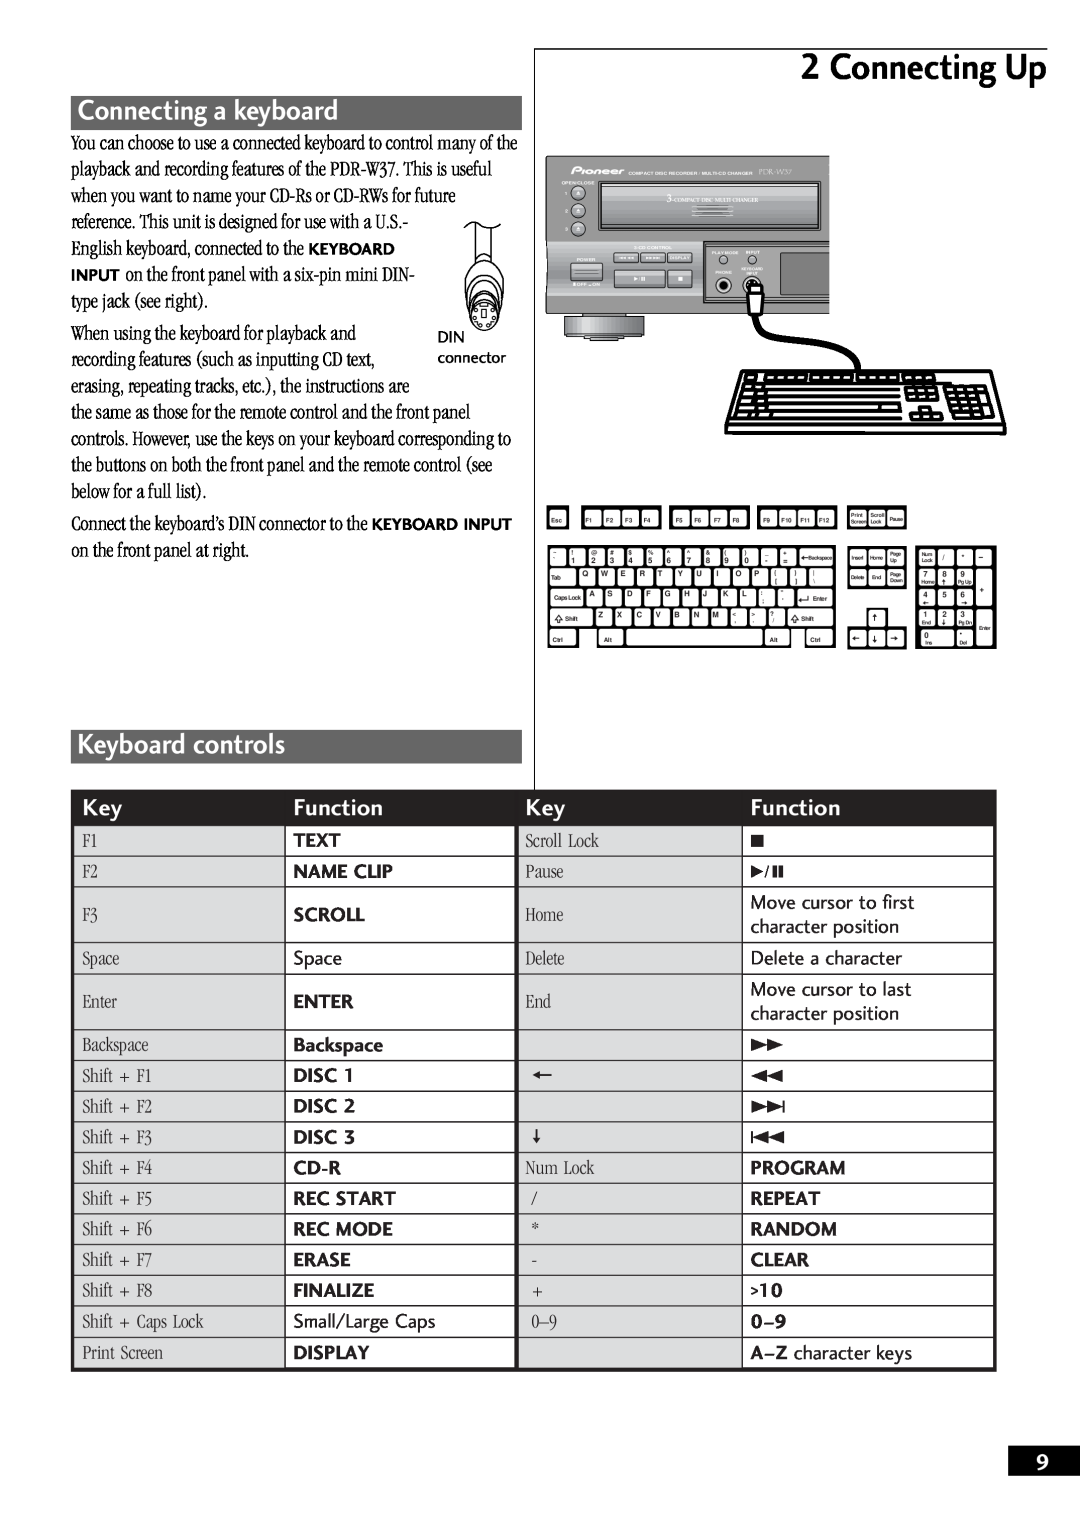 Pioneer PDR-W37 manual Connecting a keyboard, Keyboard controls, Connecting Up, Function, type jack see right 